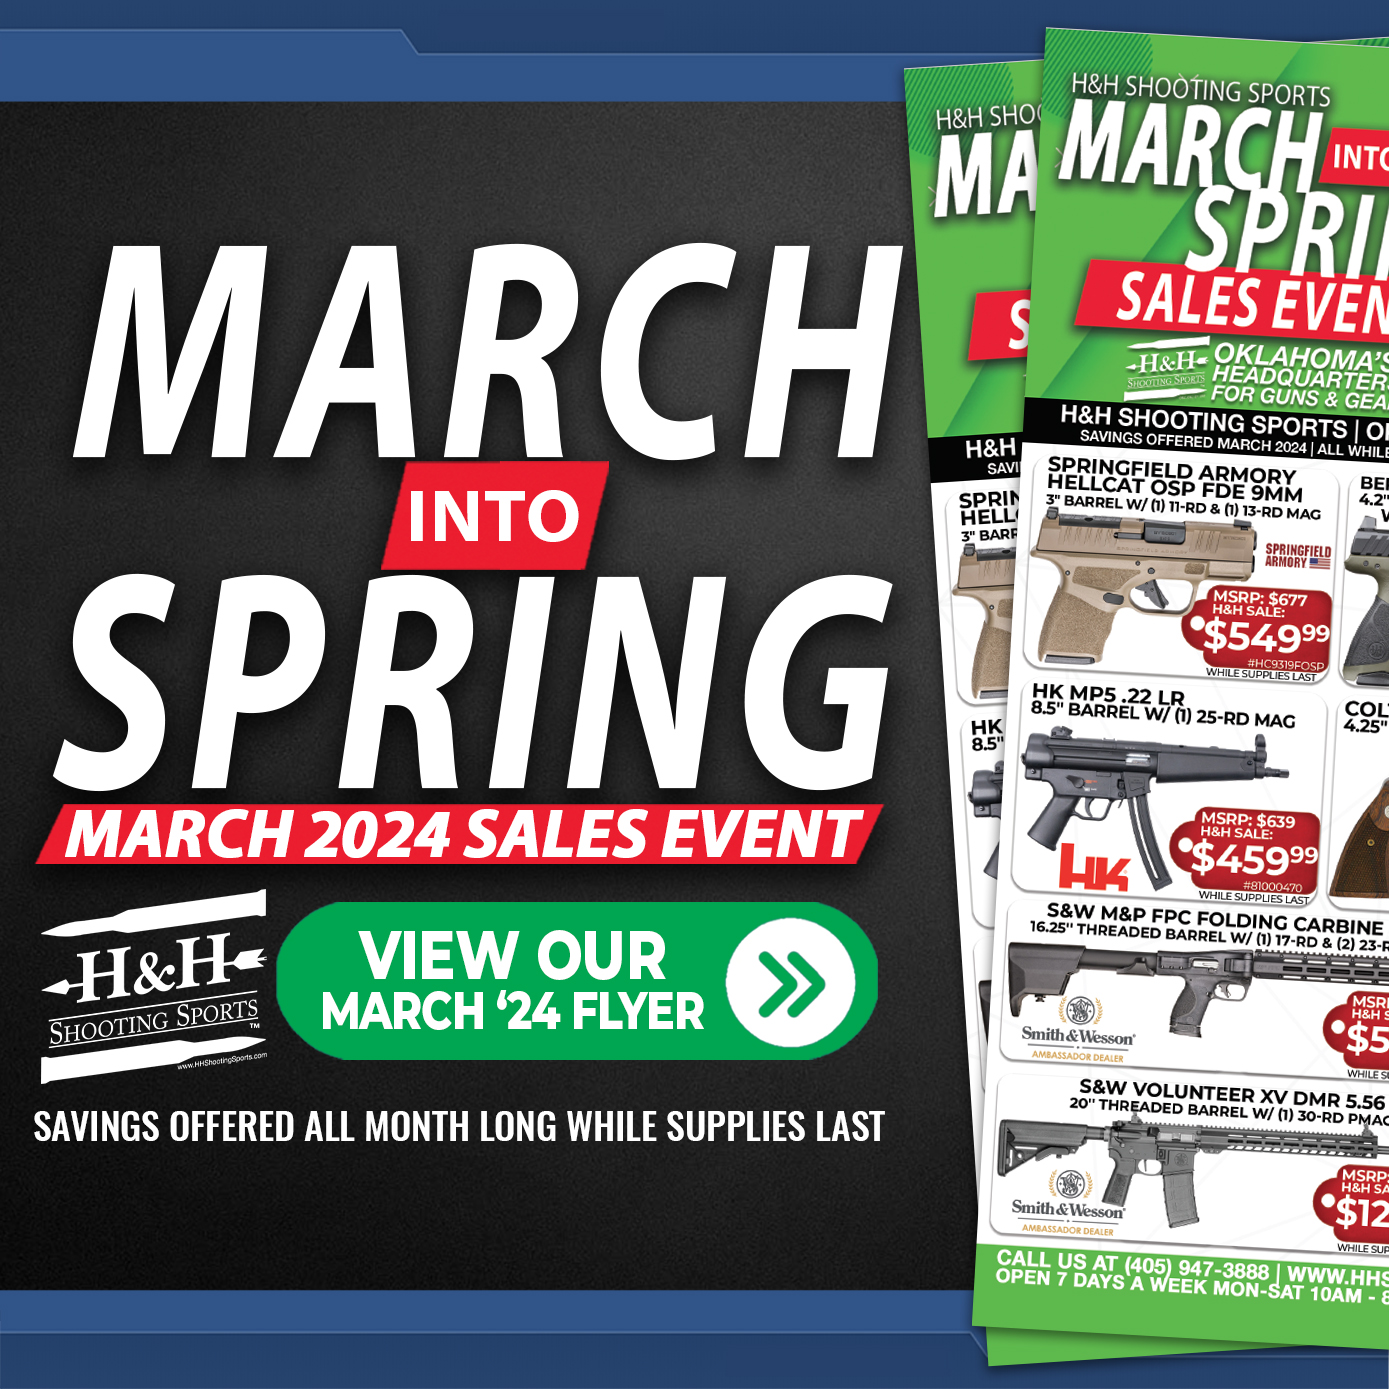 March 2024 sales event for H&H Shooting Sports in Oklahoma